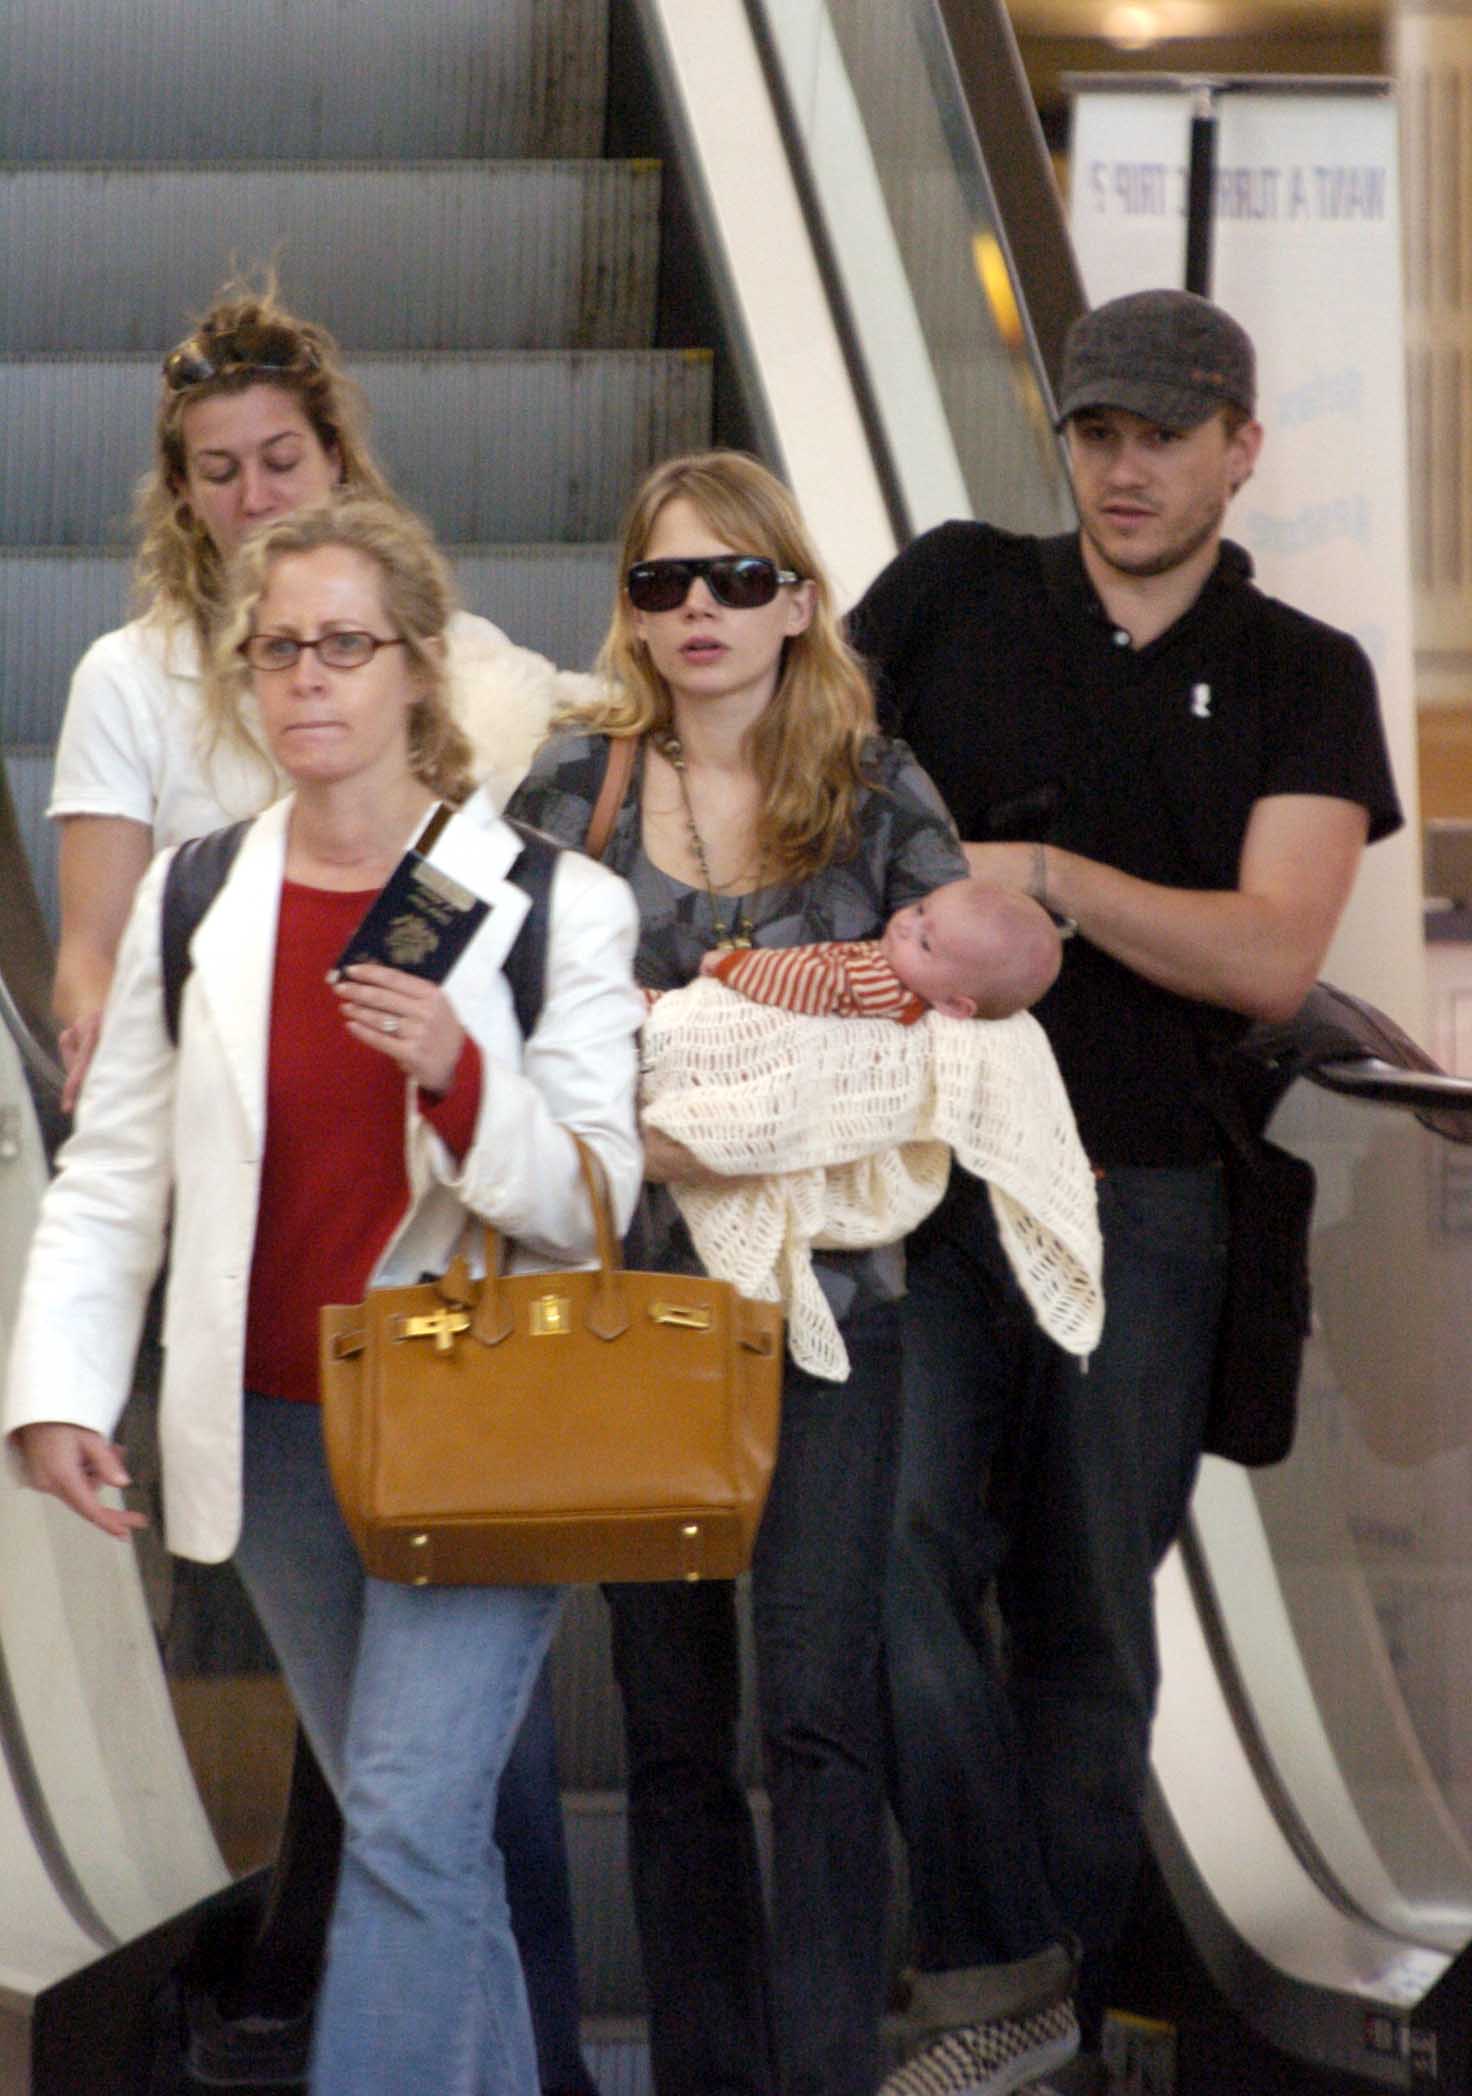 Michelle Williams, Matilda, and Heath Ledger leaving Sydney International Airport in Sydney, Australia on January 14, 2006 | Source: Getty Images